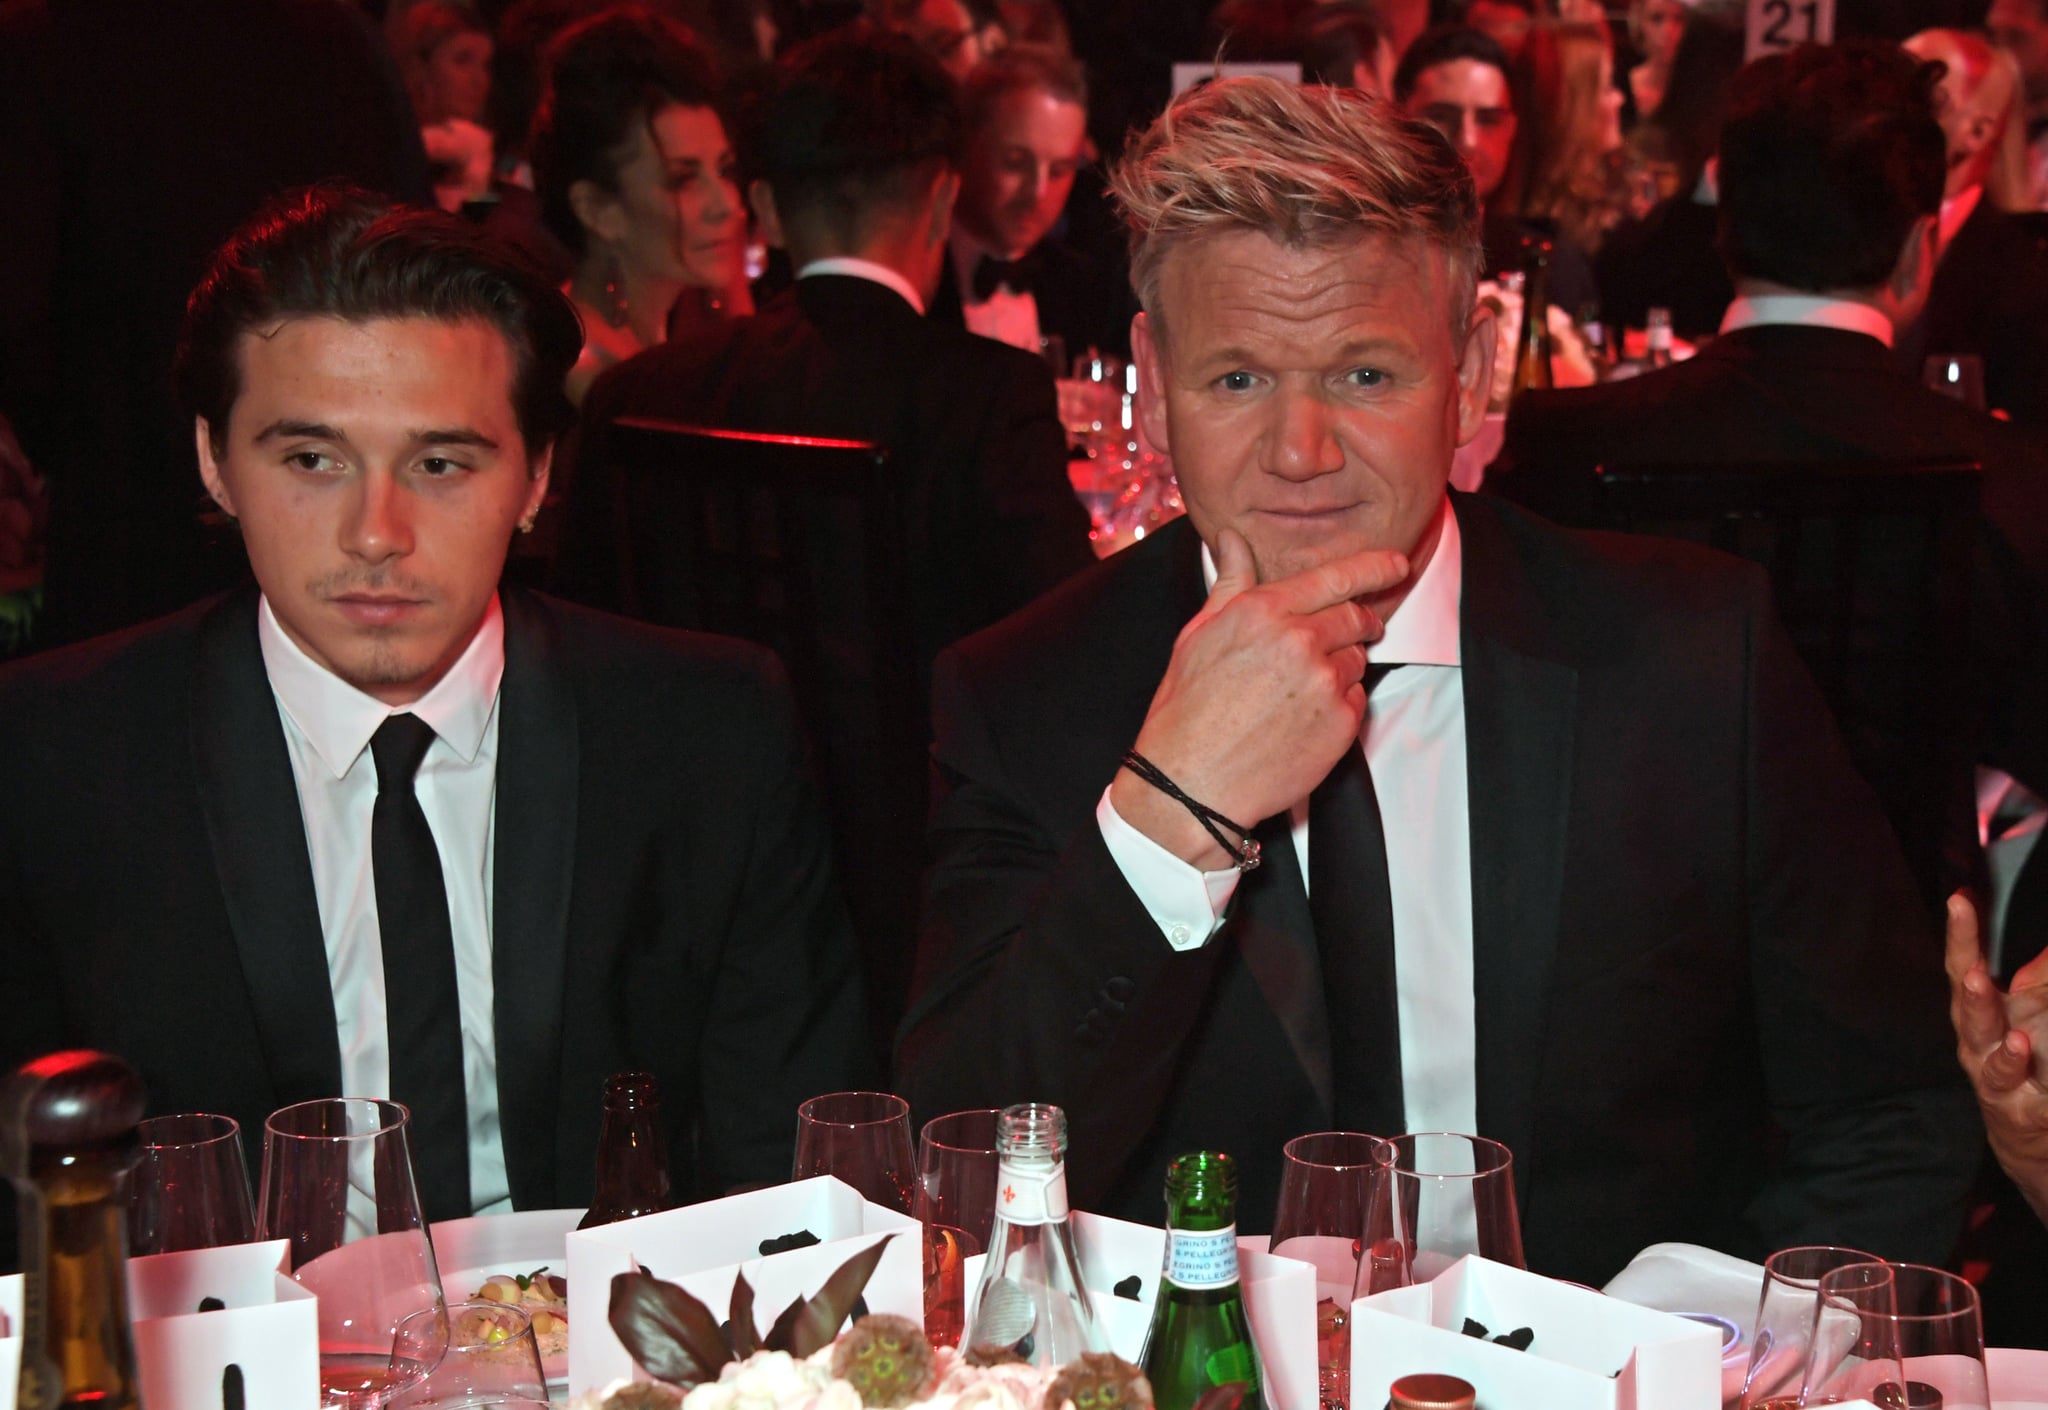 LONDON, ENGLAND - SEPTEMBER 03:   Brooklyn Beckham and Gordon Ramsay attend the the GQ Men Of The Year Awards 2019 in association with HUGO BOSS at the Tate Modern on September 3, 2019 in London, England.  (Photo by David M. Benett/Dave Benett/Getty Images for HUGO BOSS)